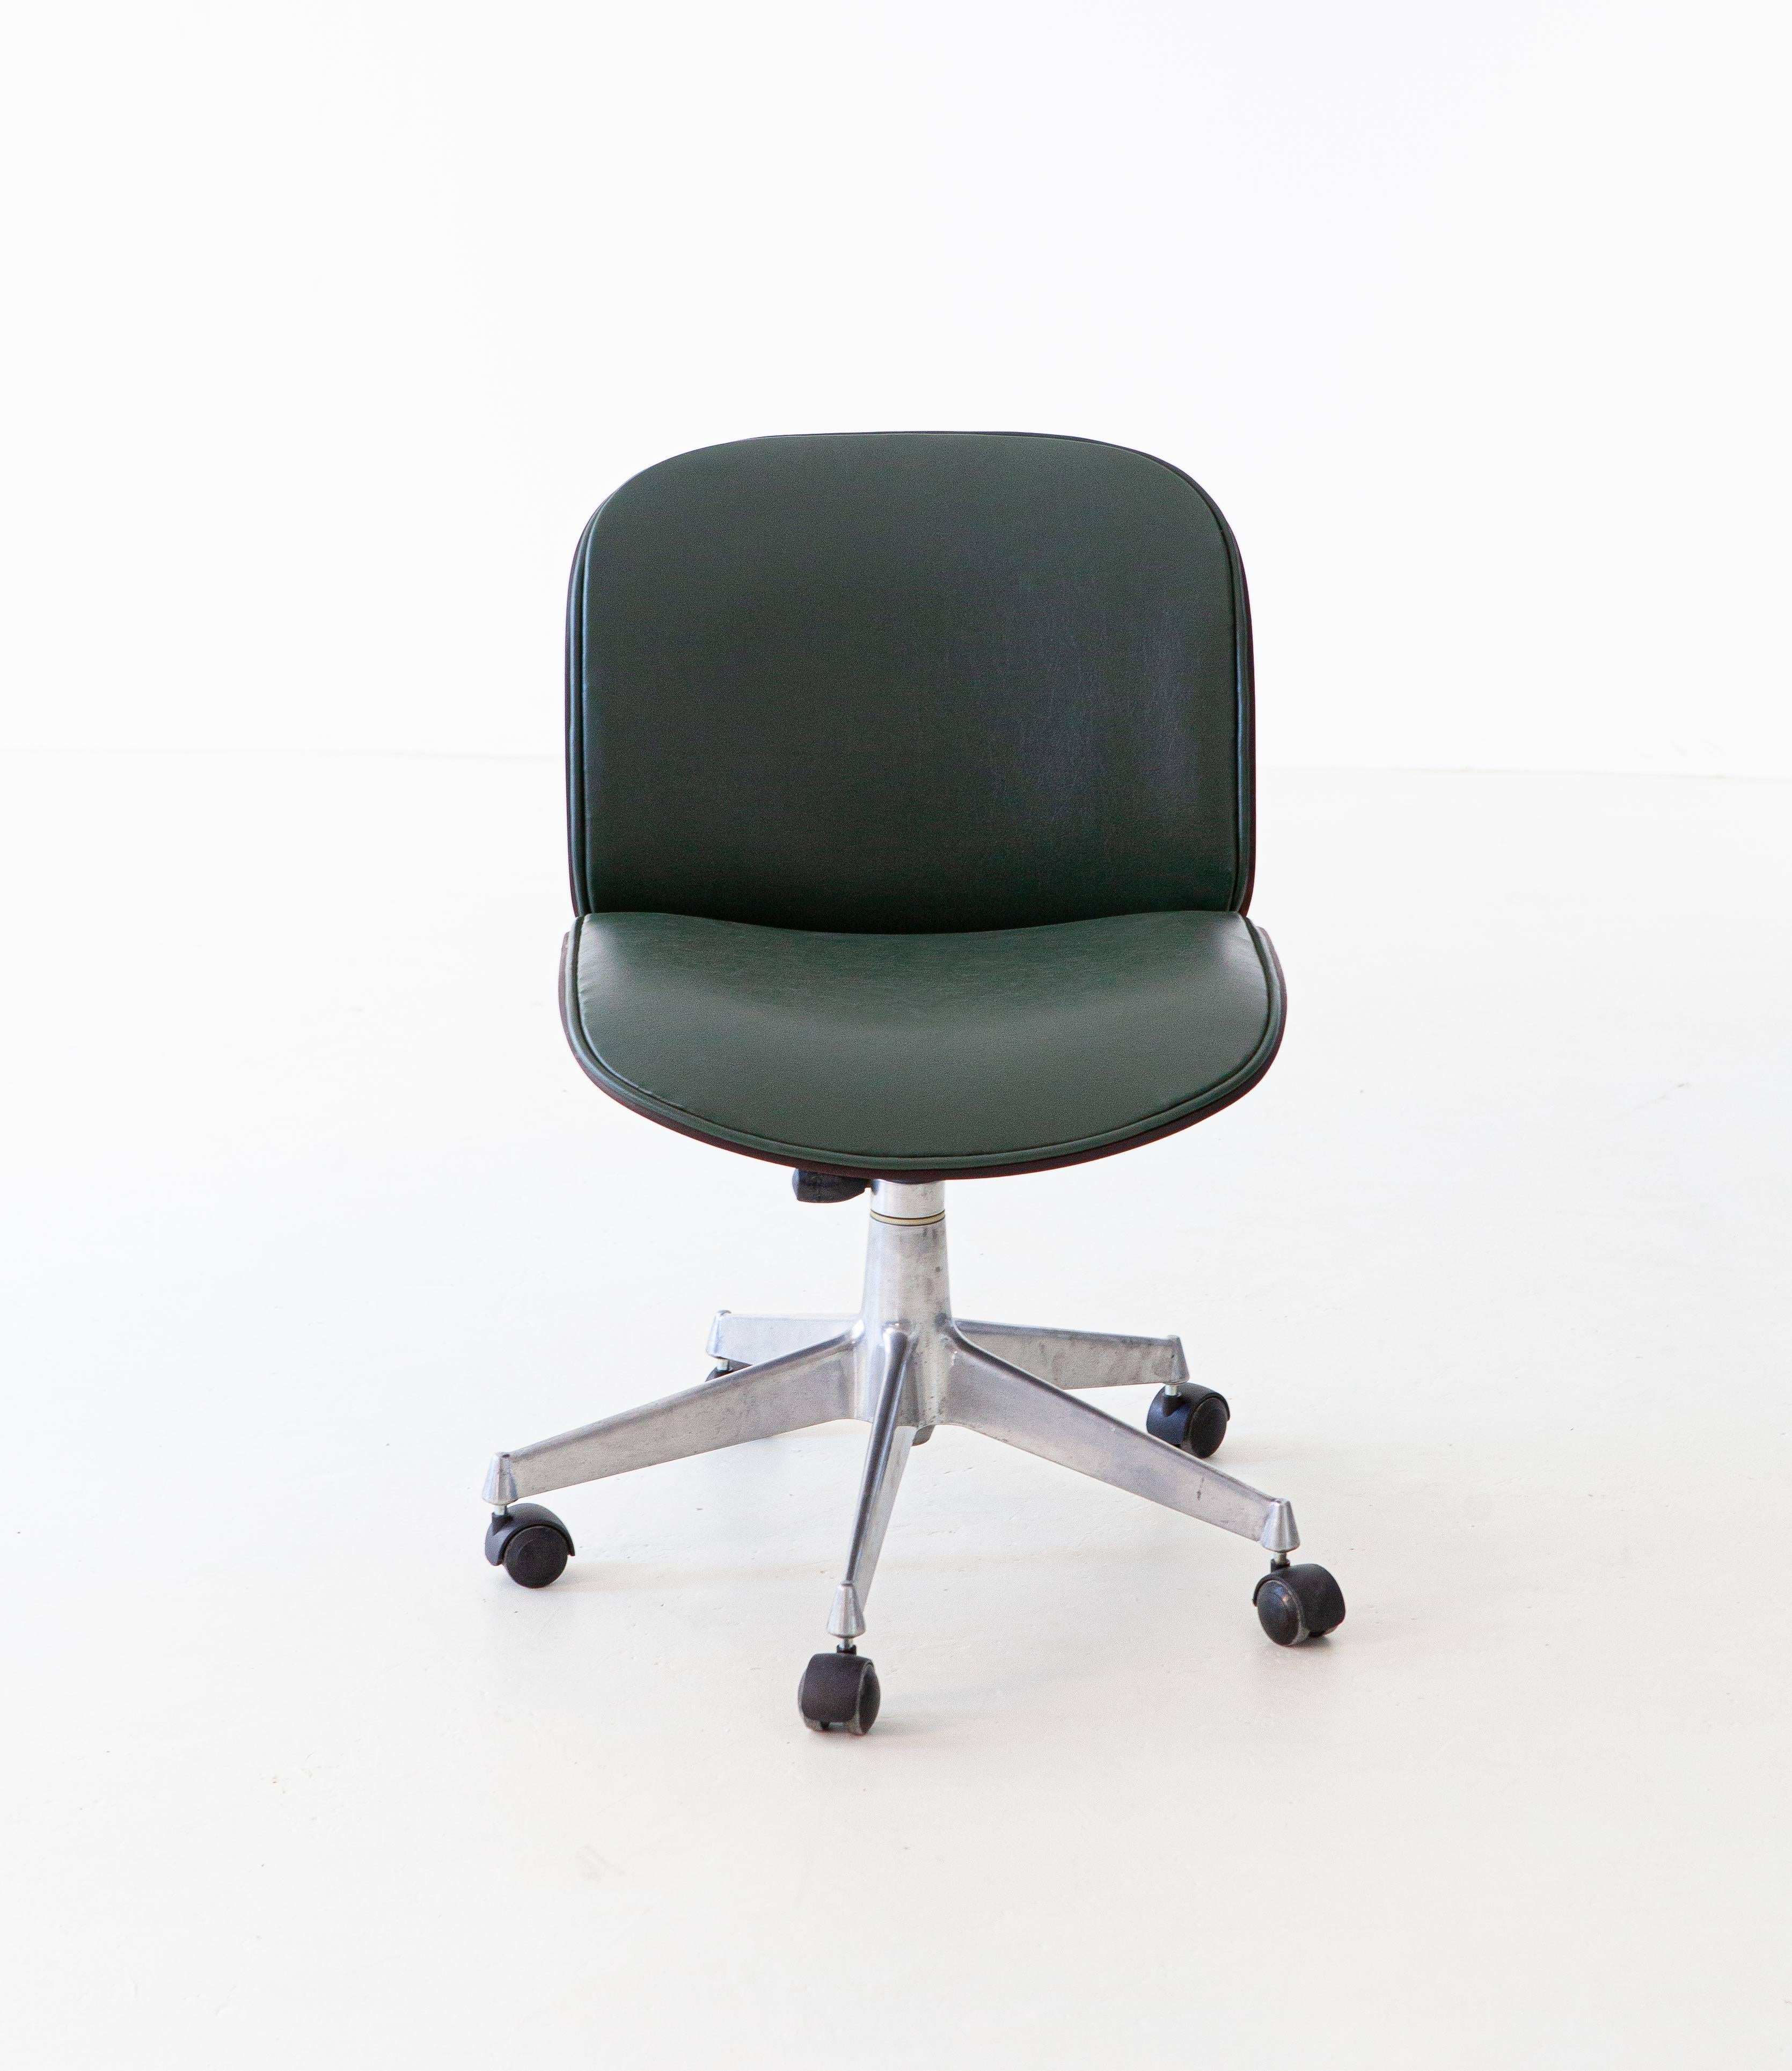 Office swivel chair designed by Ico Parisi and produced by M.I.M. (Mobili Italiani Moderni) Roma, Italy

This is the 1st series from the 1950s.

Fully restored curved wooden frame with a deep sanding of the original finishing, then a light hand of